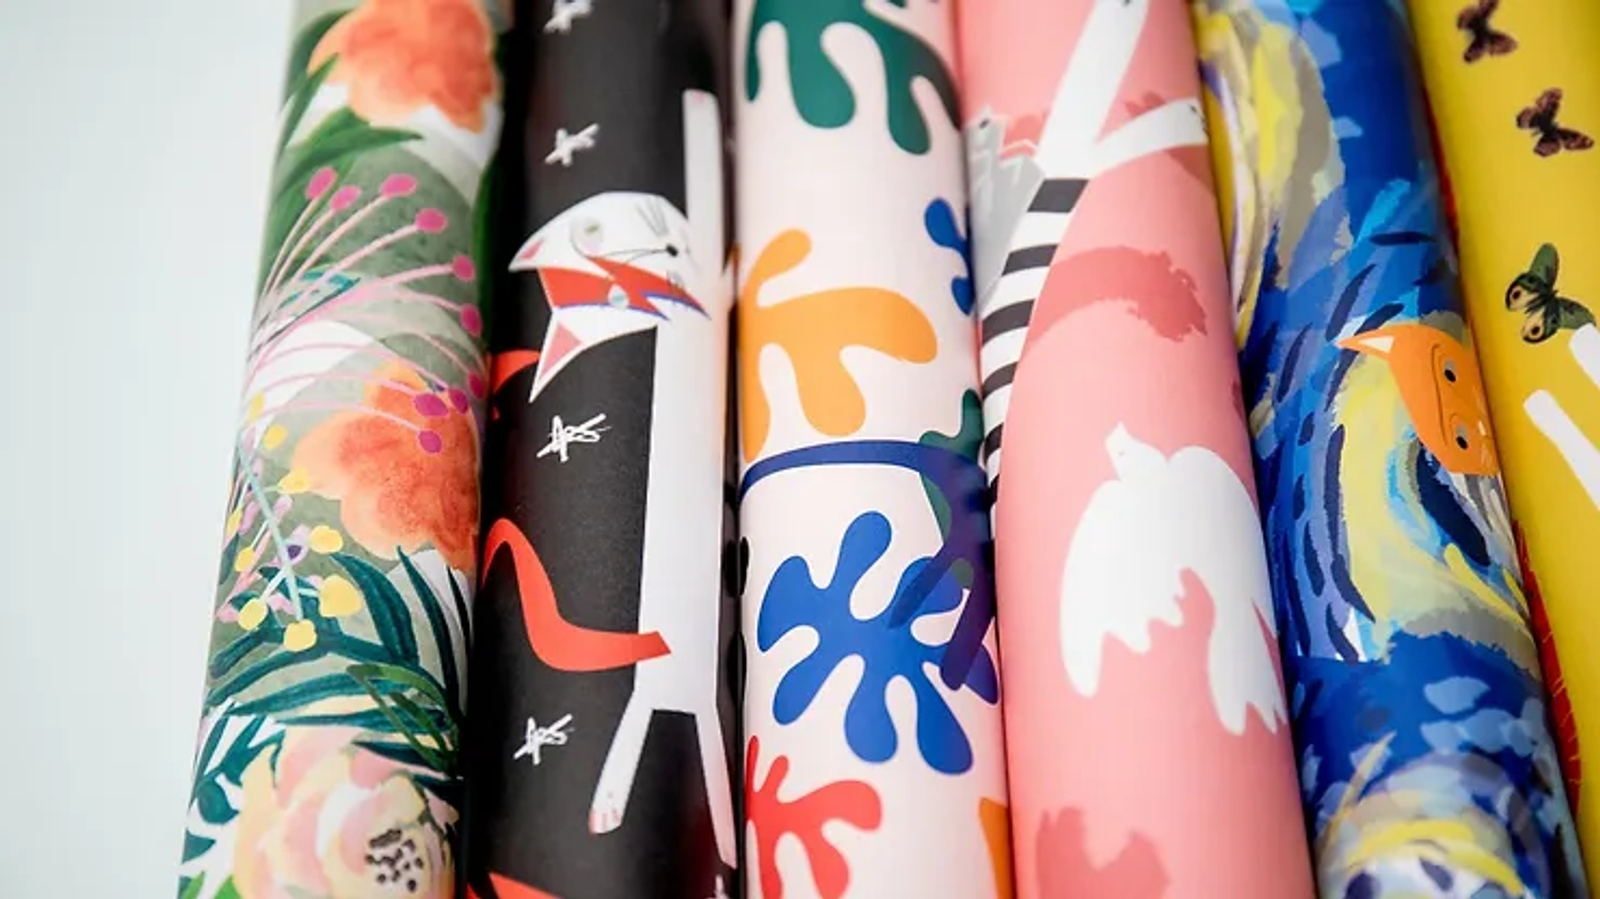 Several colorful rolls of wrapping paper